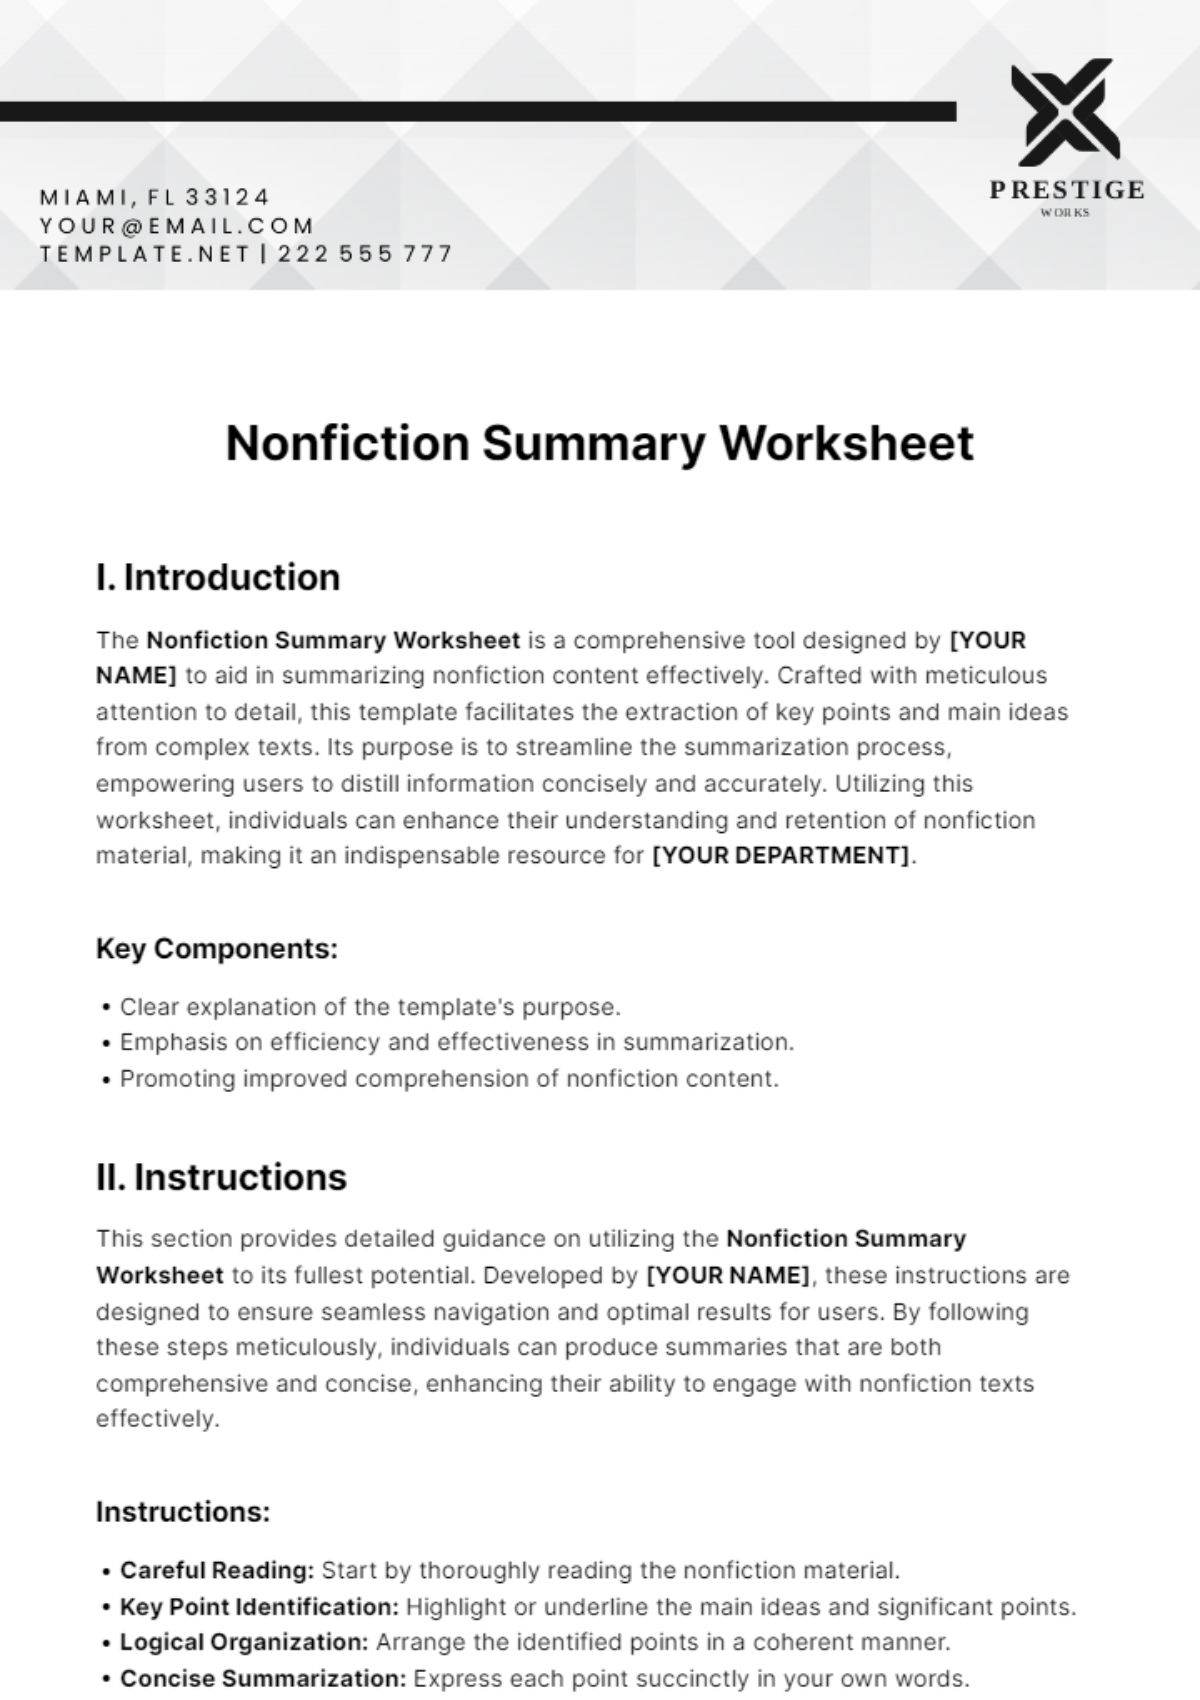 Nonfiction Summary Worksheet Template